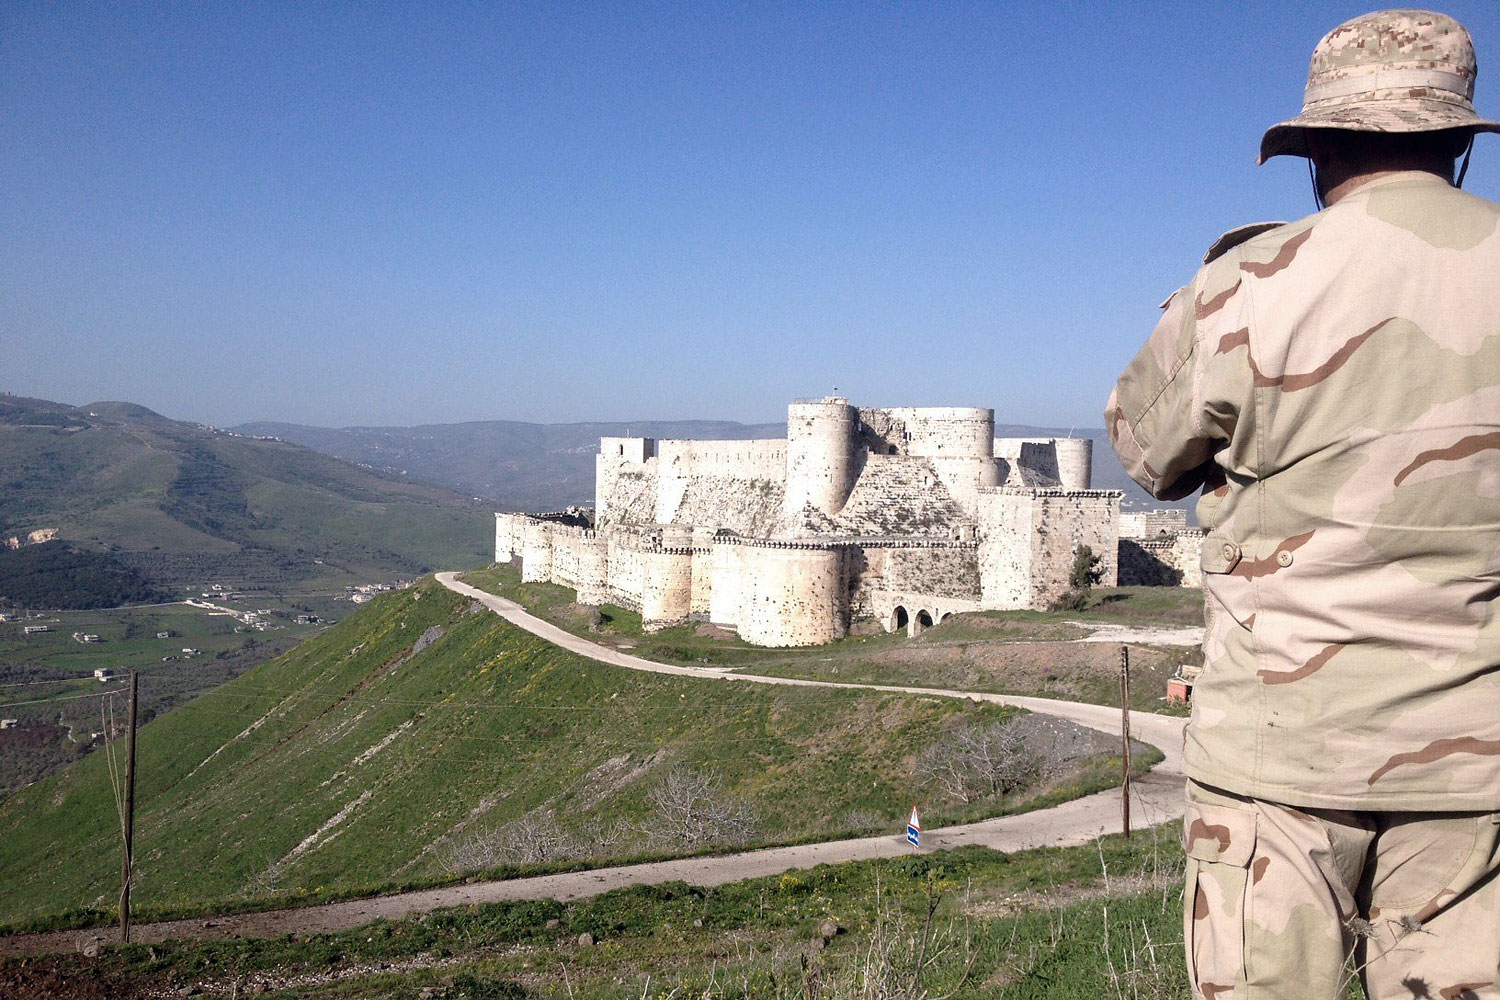 A government soldier looks out over the renowned Crusader castle Krak des Chevaliers near the Syria-Lebanon border after forces loyal to Syria's President Bashar al-Assad seized the fortress on March 20, 2014.